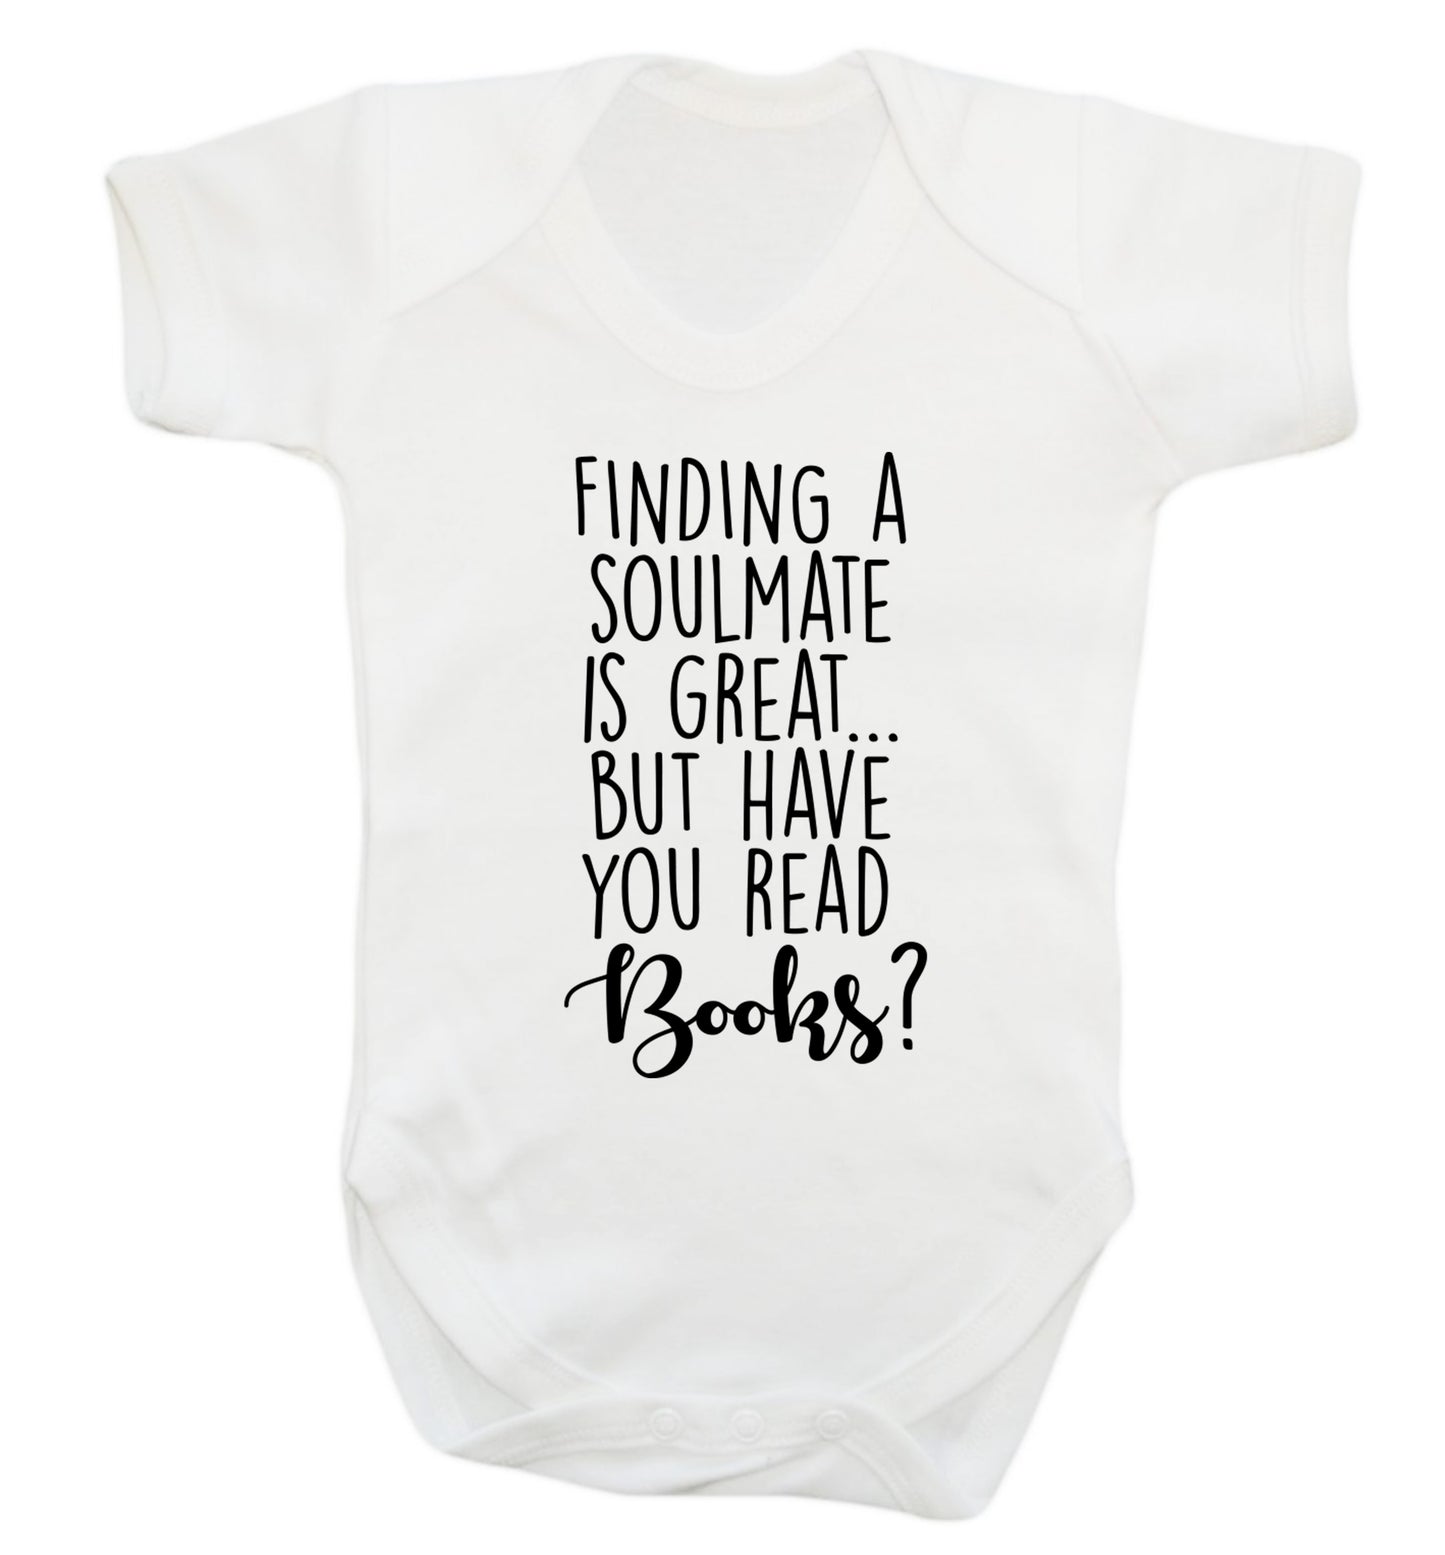 Finding a soulmate is great but have you read books? Baby Vest white 18-24 months